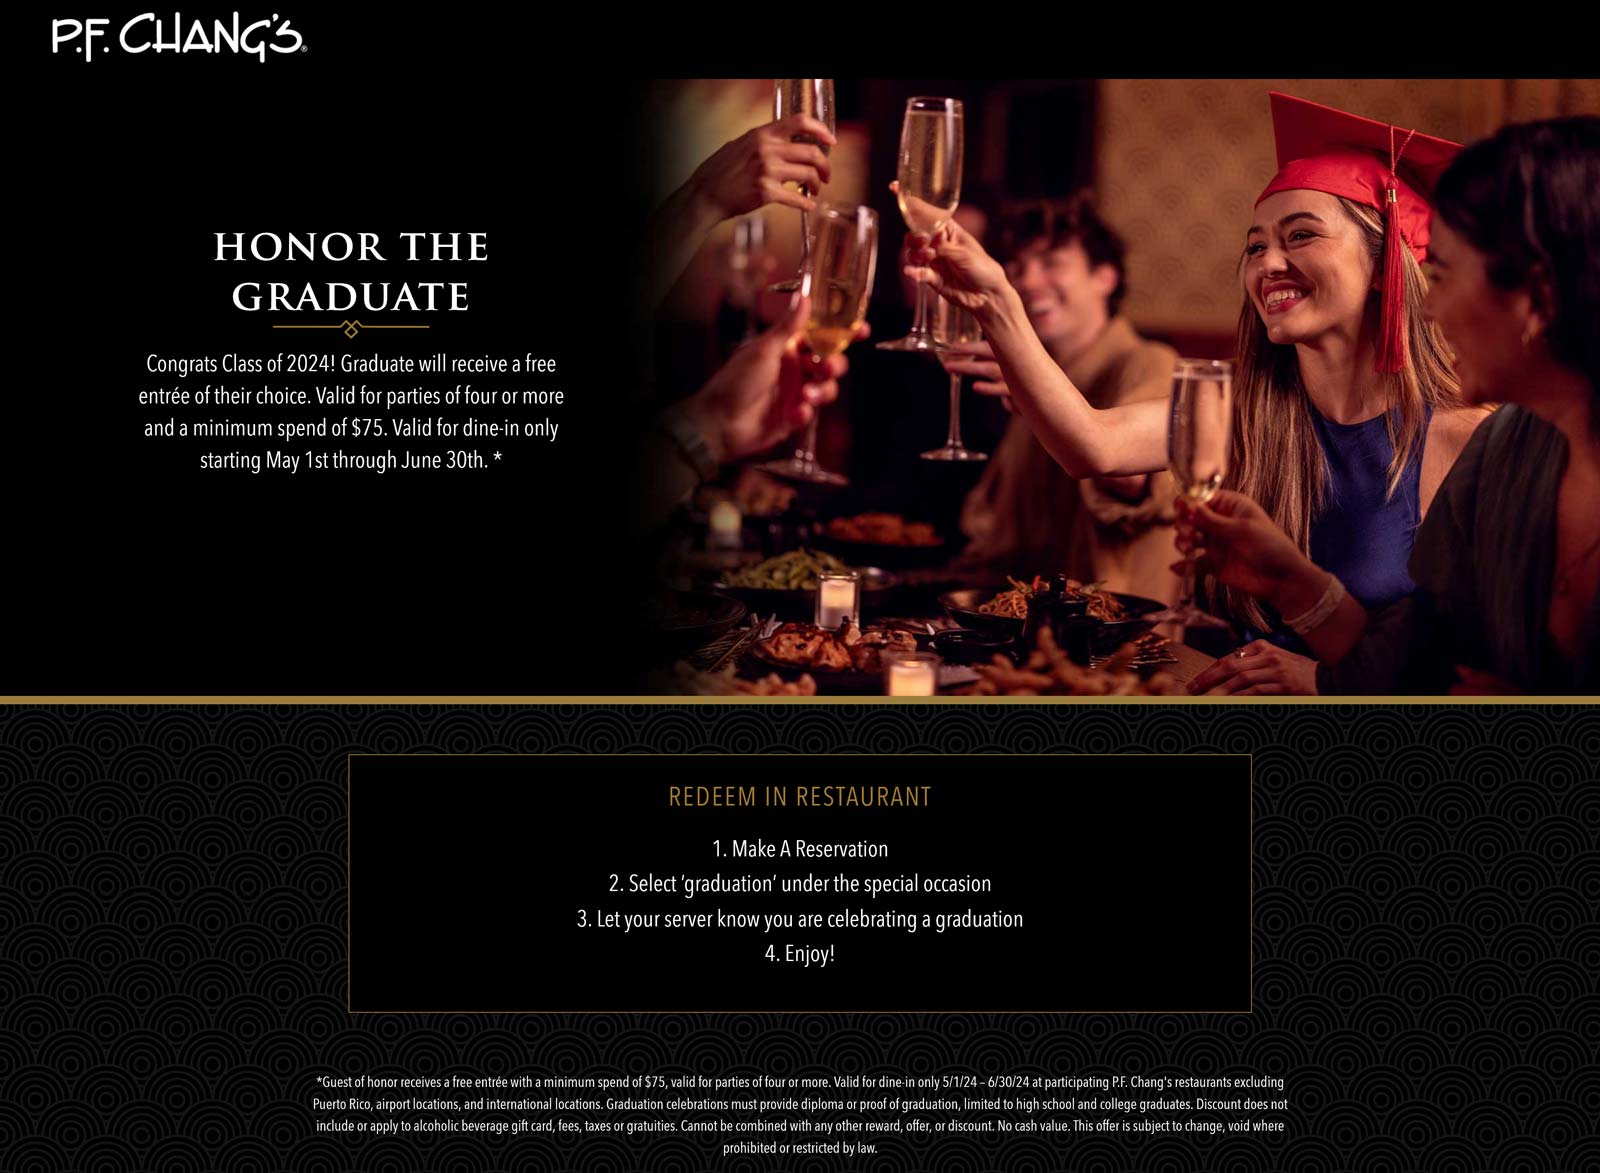 P.F. Changs restaurants Coupon  Free entree for graduates on $75 at P.F. Changs #pfchangs 